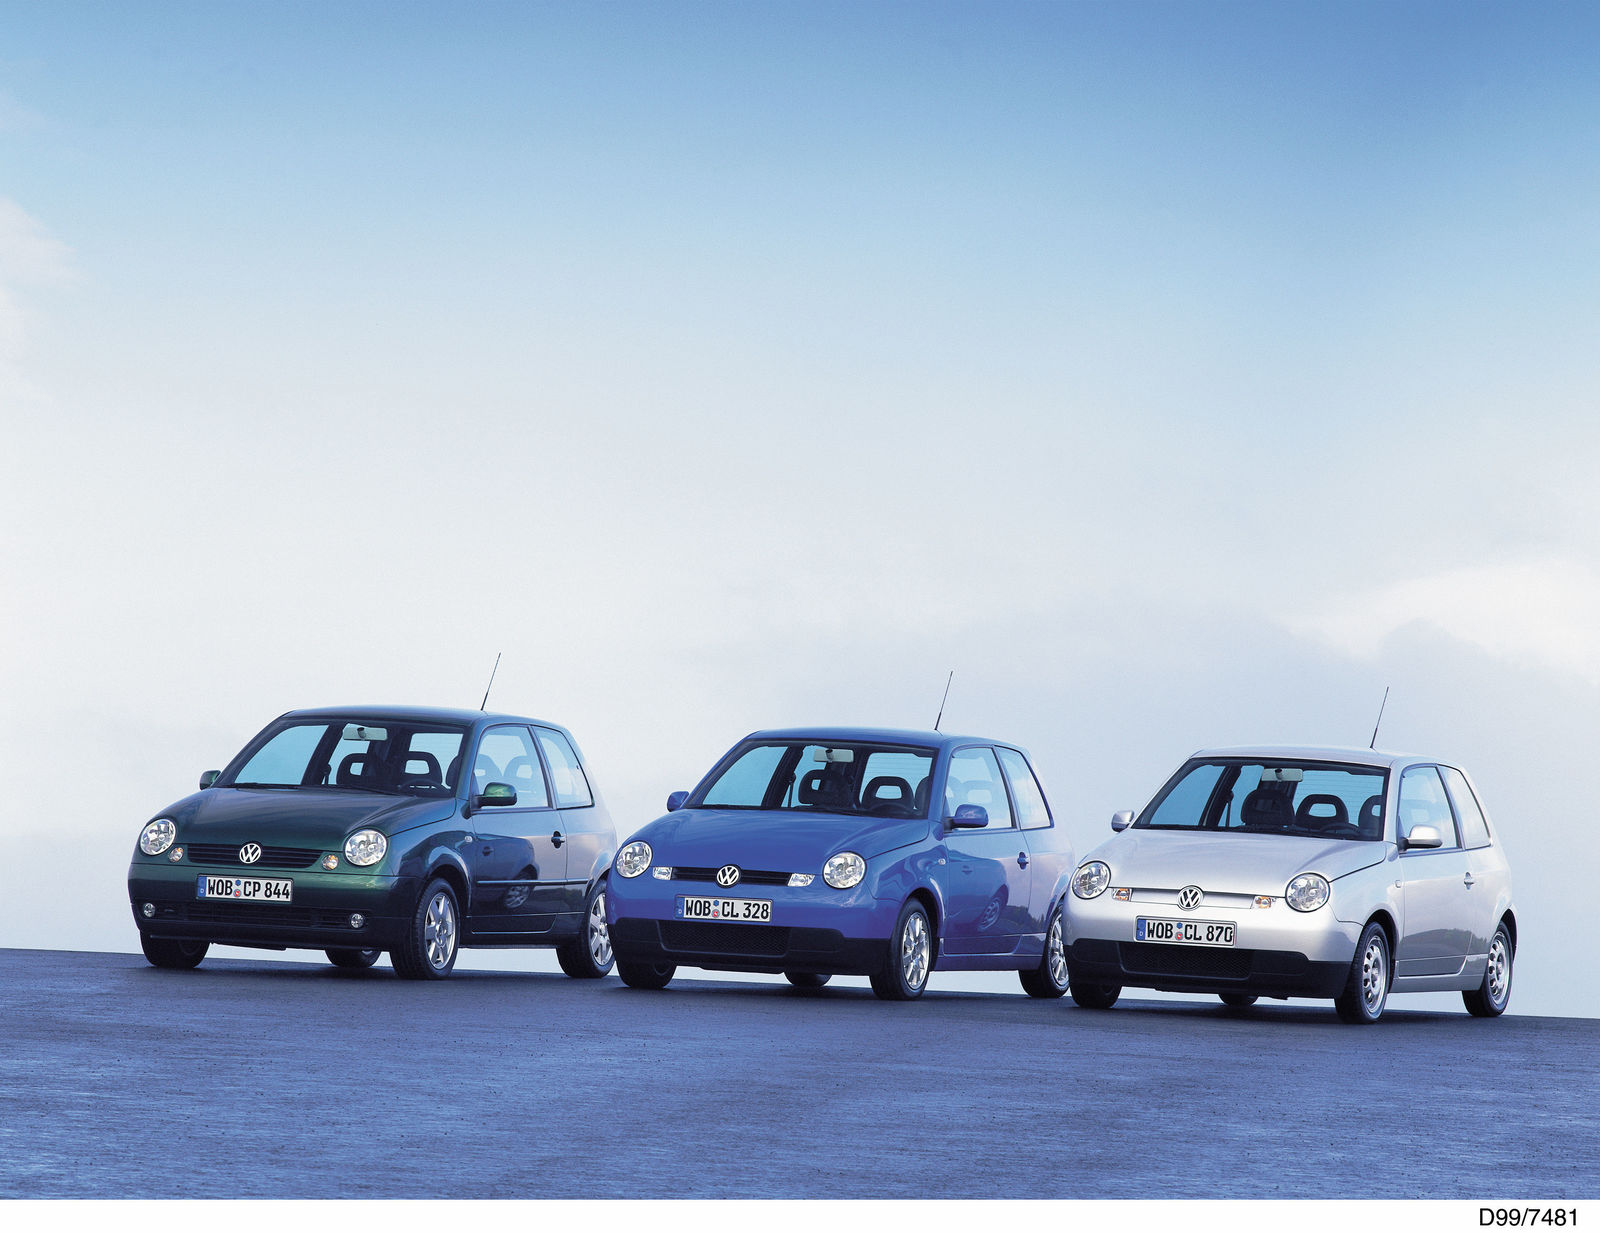 Product: Lupo and Lupo 3L TDI (1999)